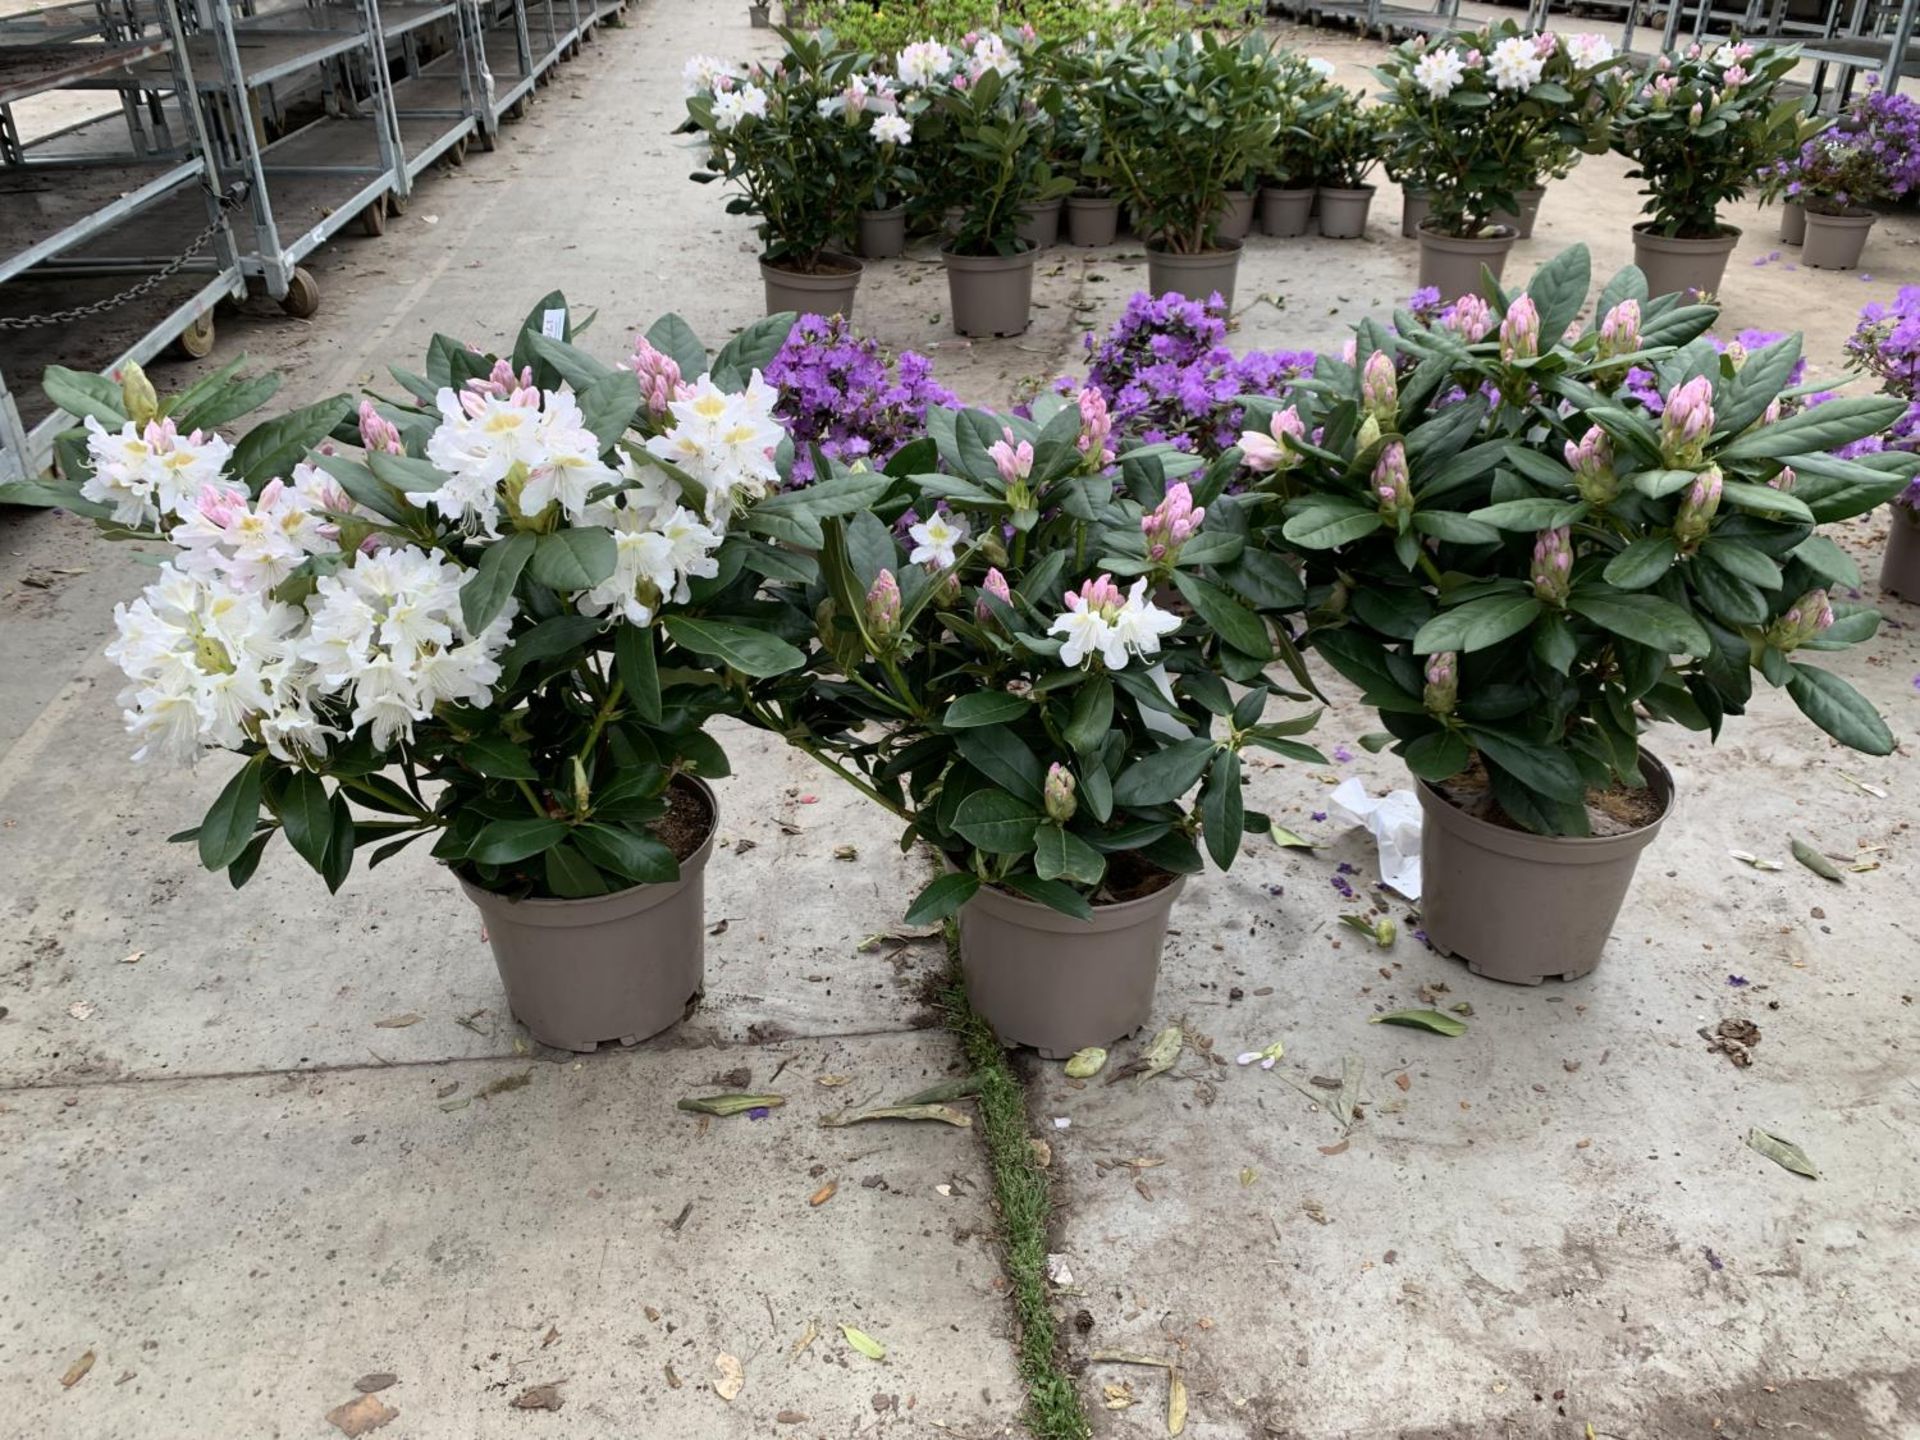 THREE RHODODENDRON CUNNINGHAMS WHITE 7.5 LTR POTS HEIGHT 70-80 CM TO BE SOLD FOR THE THREE PLUS VAT